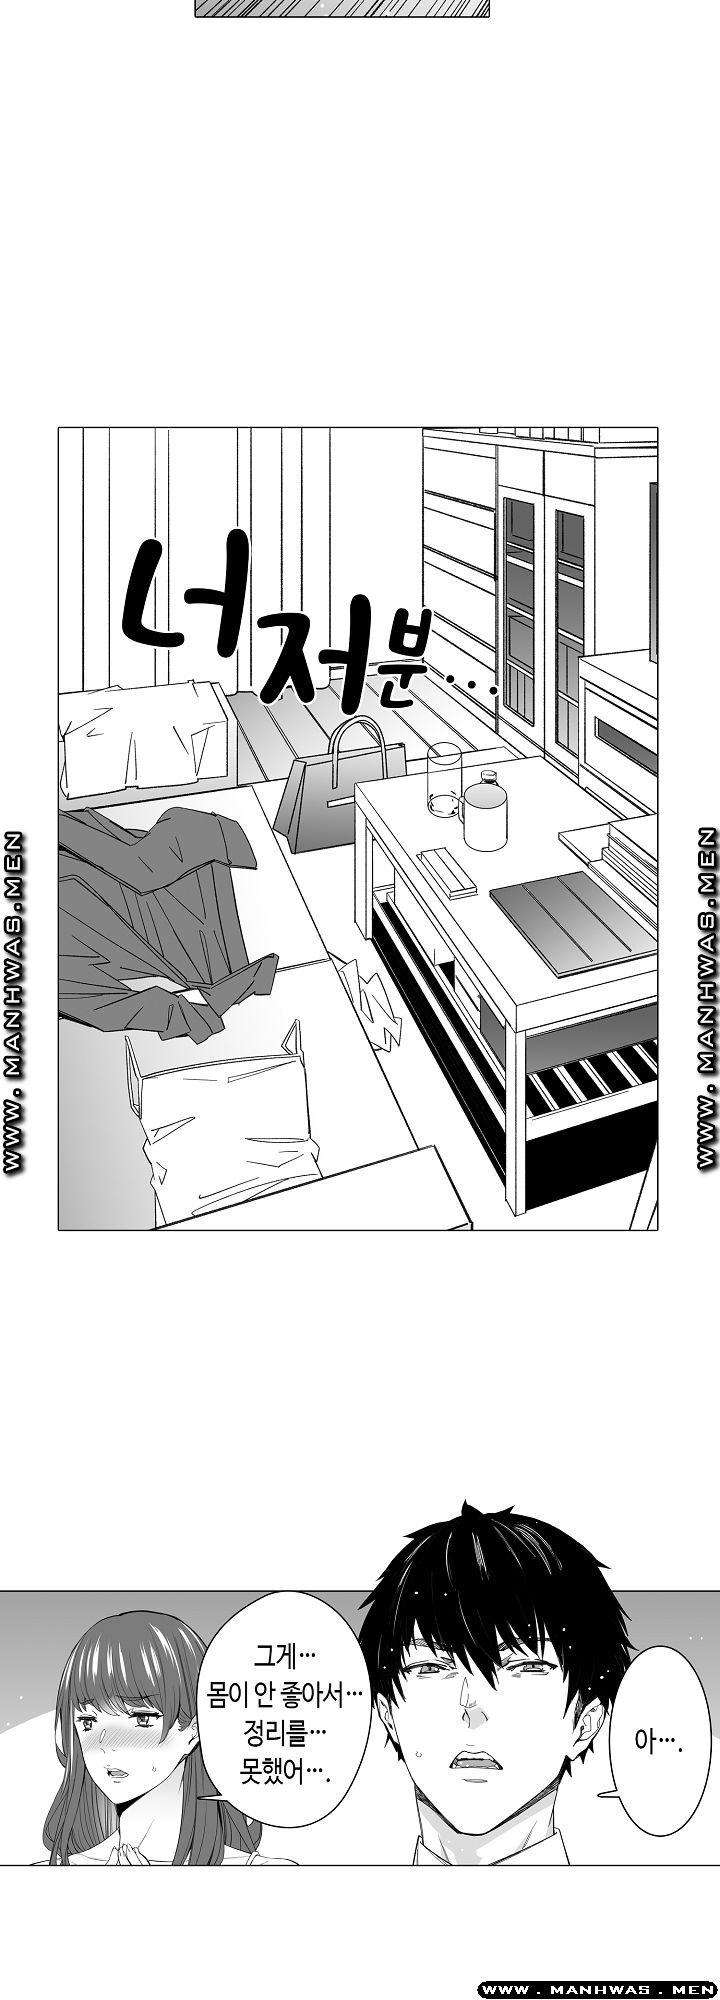 Please Let Me Go Home Raw - Chapter 13 Page 6